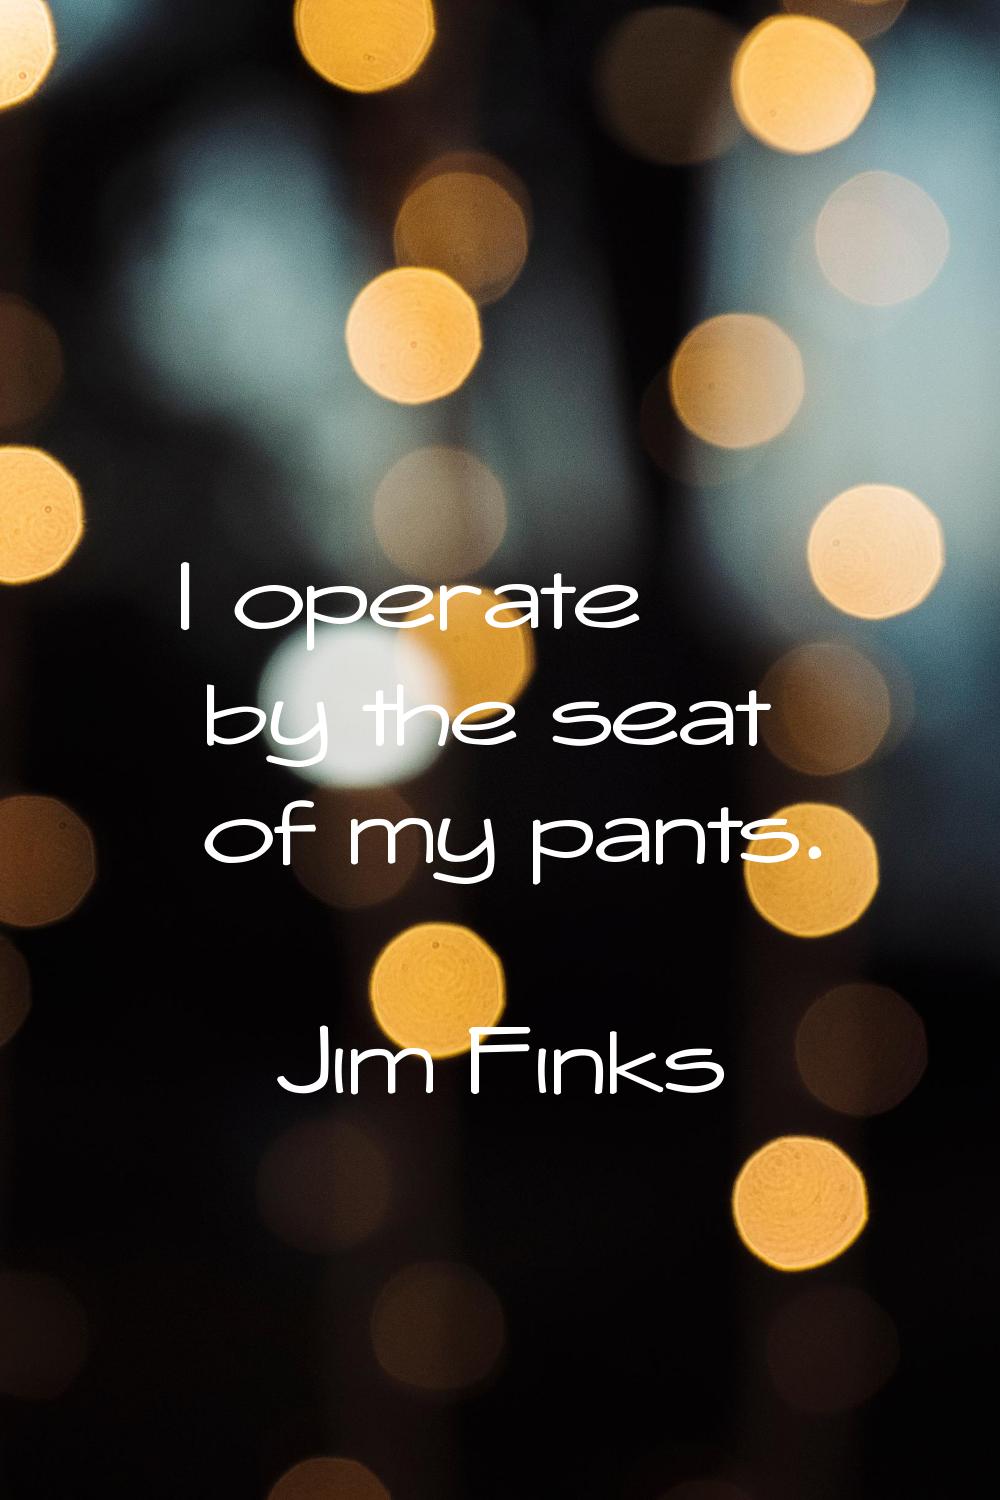 I operate by the seat of my pants.